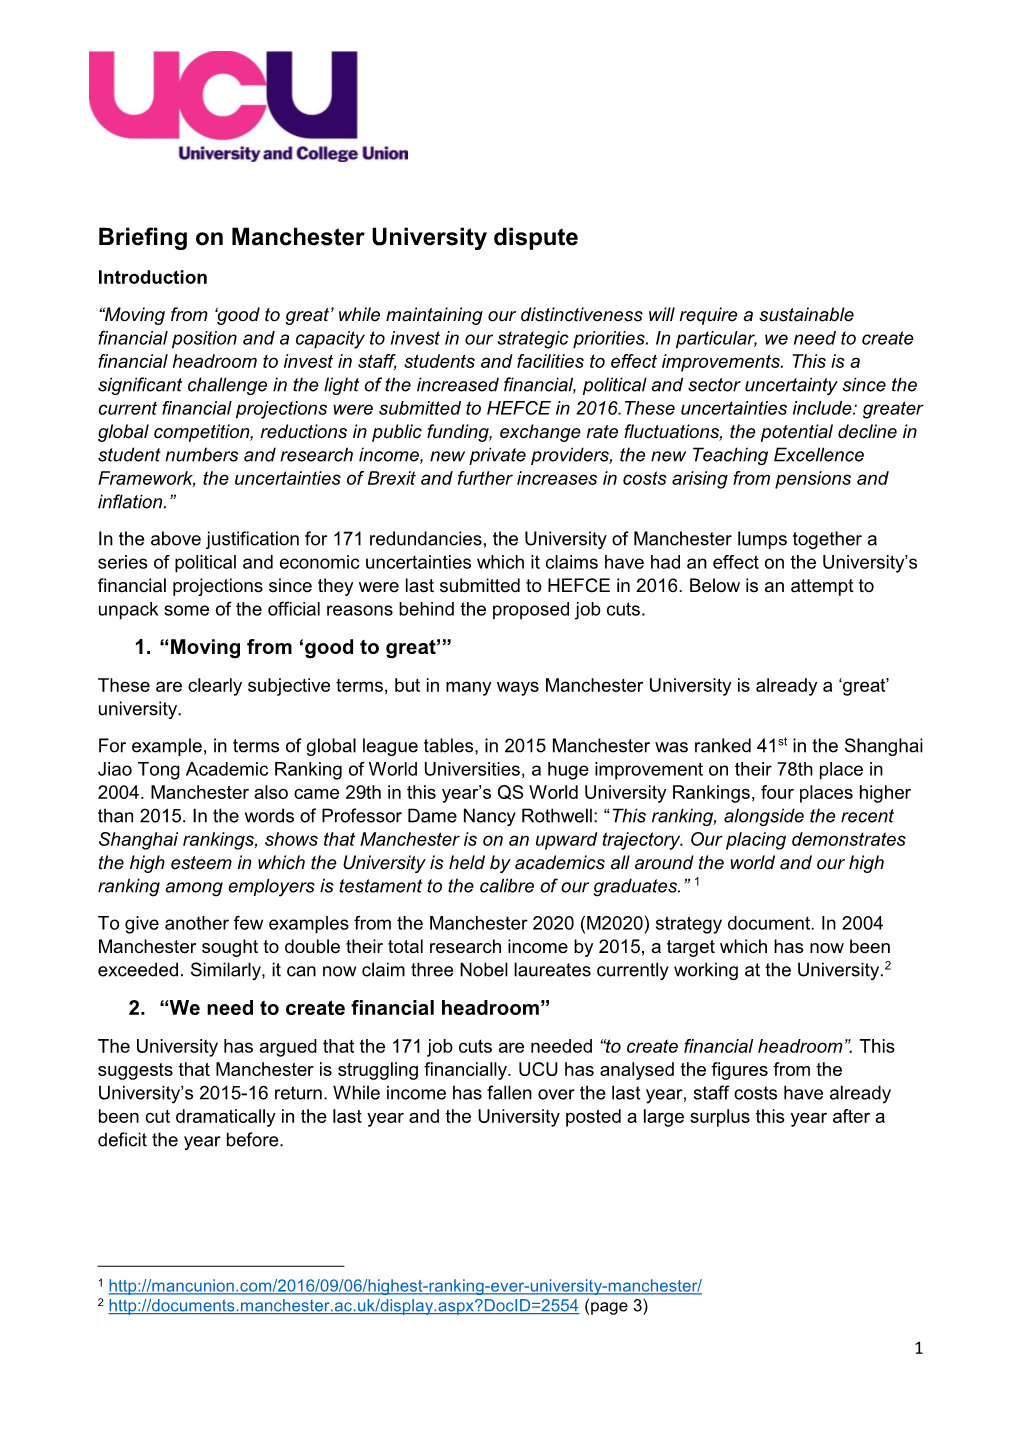 Briefing on Manchester University Dispute